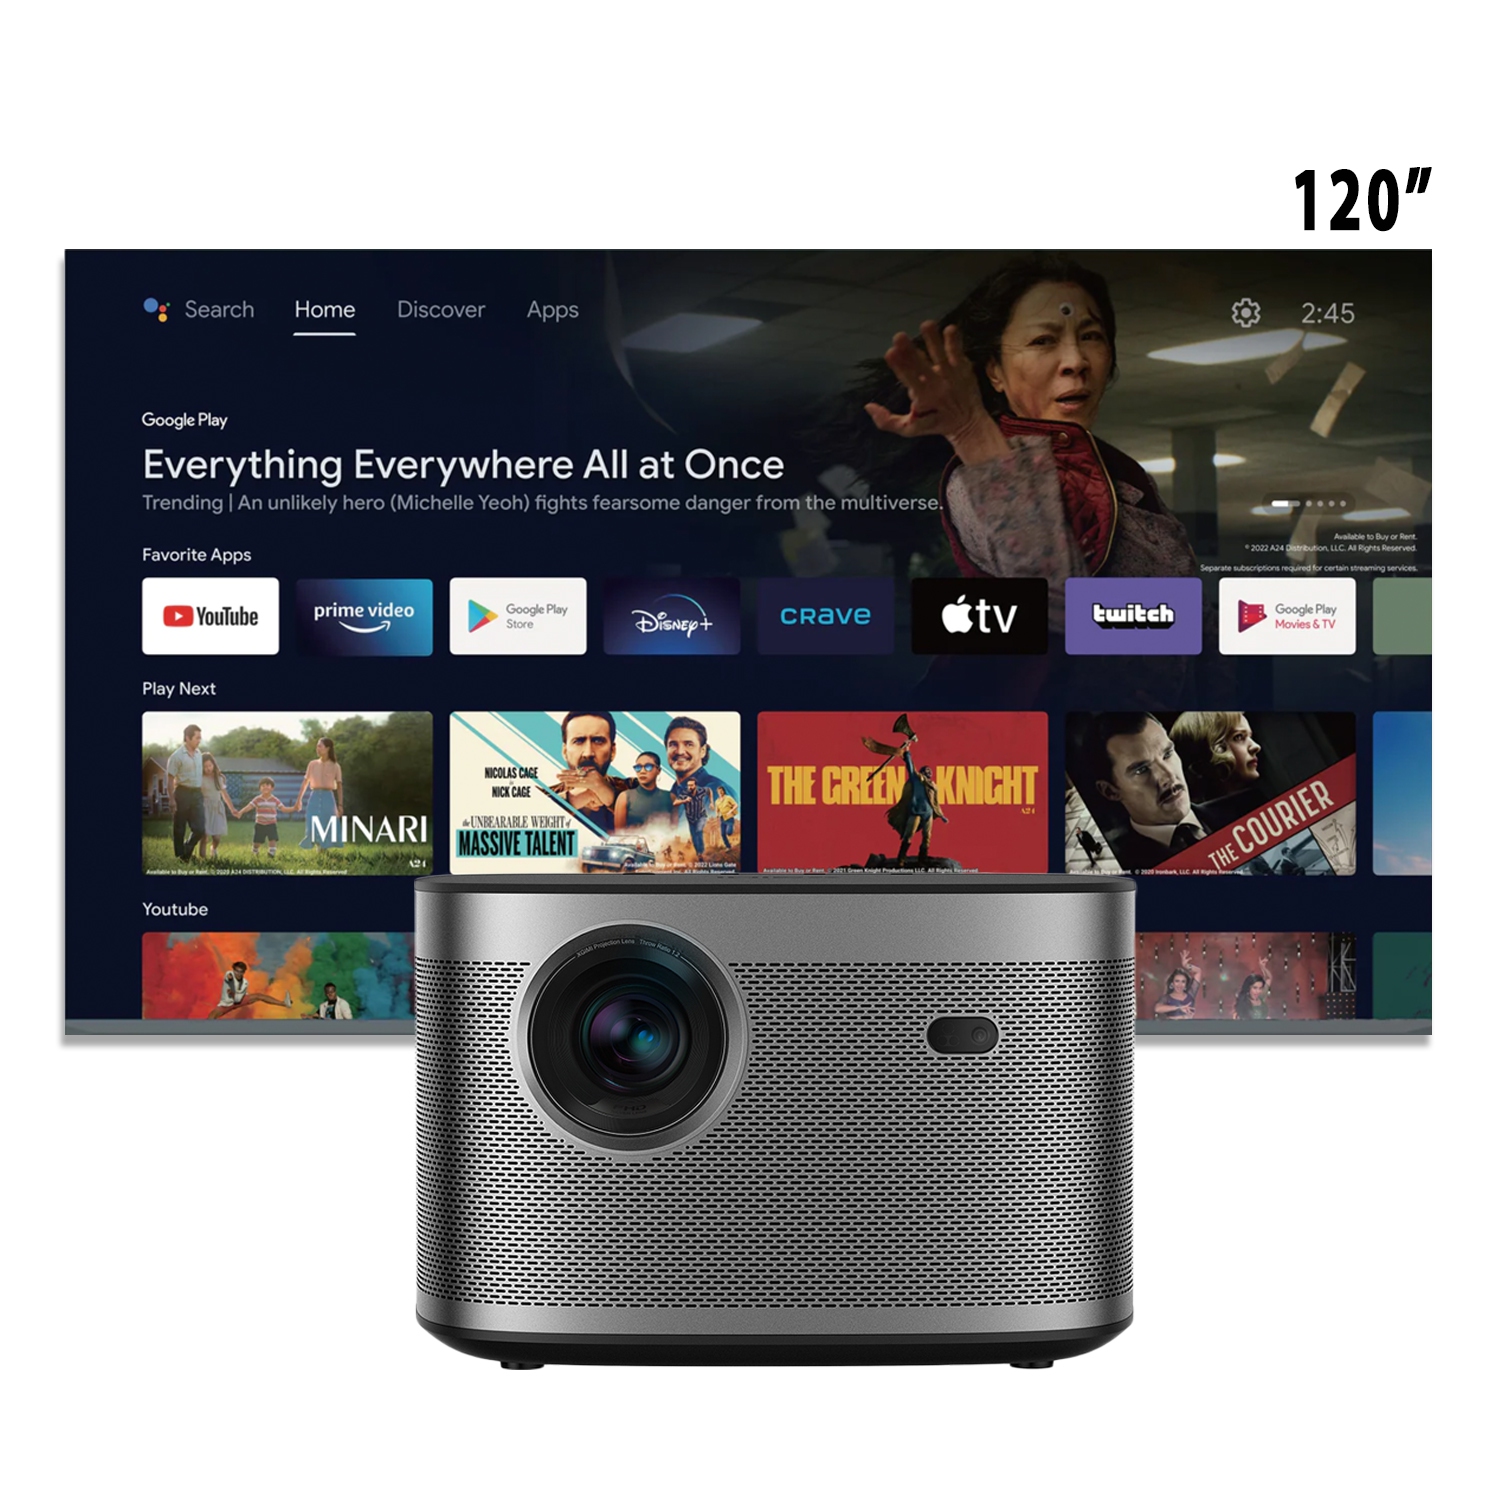 XGIMI Horizon 4K Projector + 120" Screen Bundle, Android TV, 2200 ANSI Lumens, 16W Harman Kardon Speakers, HDR10, Home Theater Image Quality